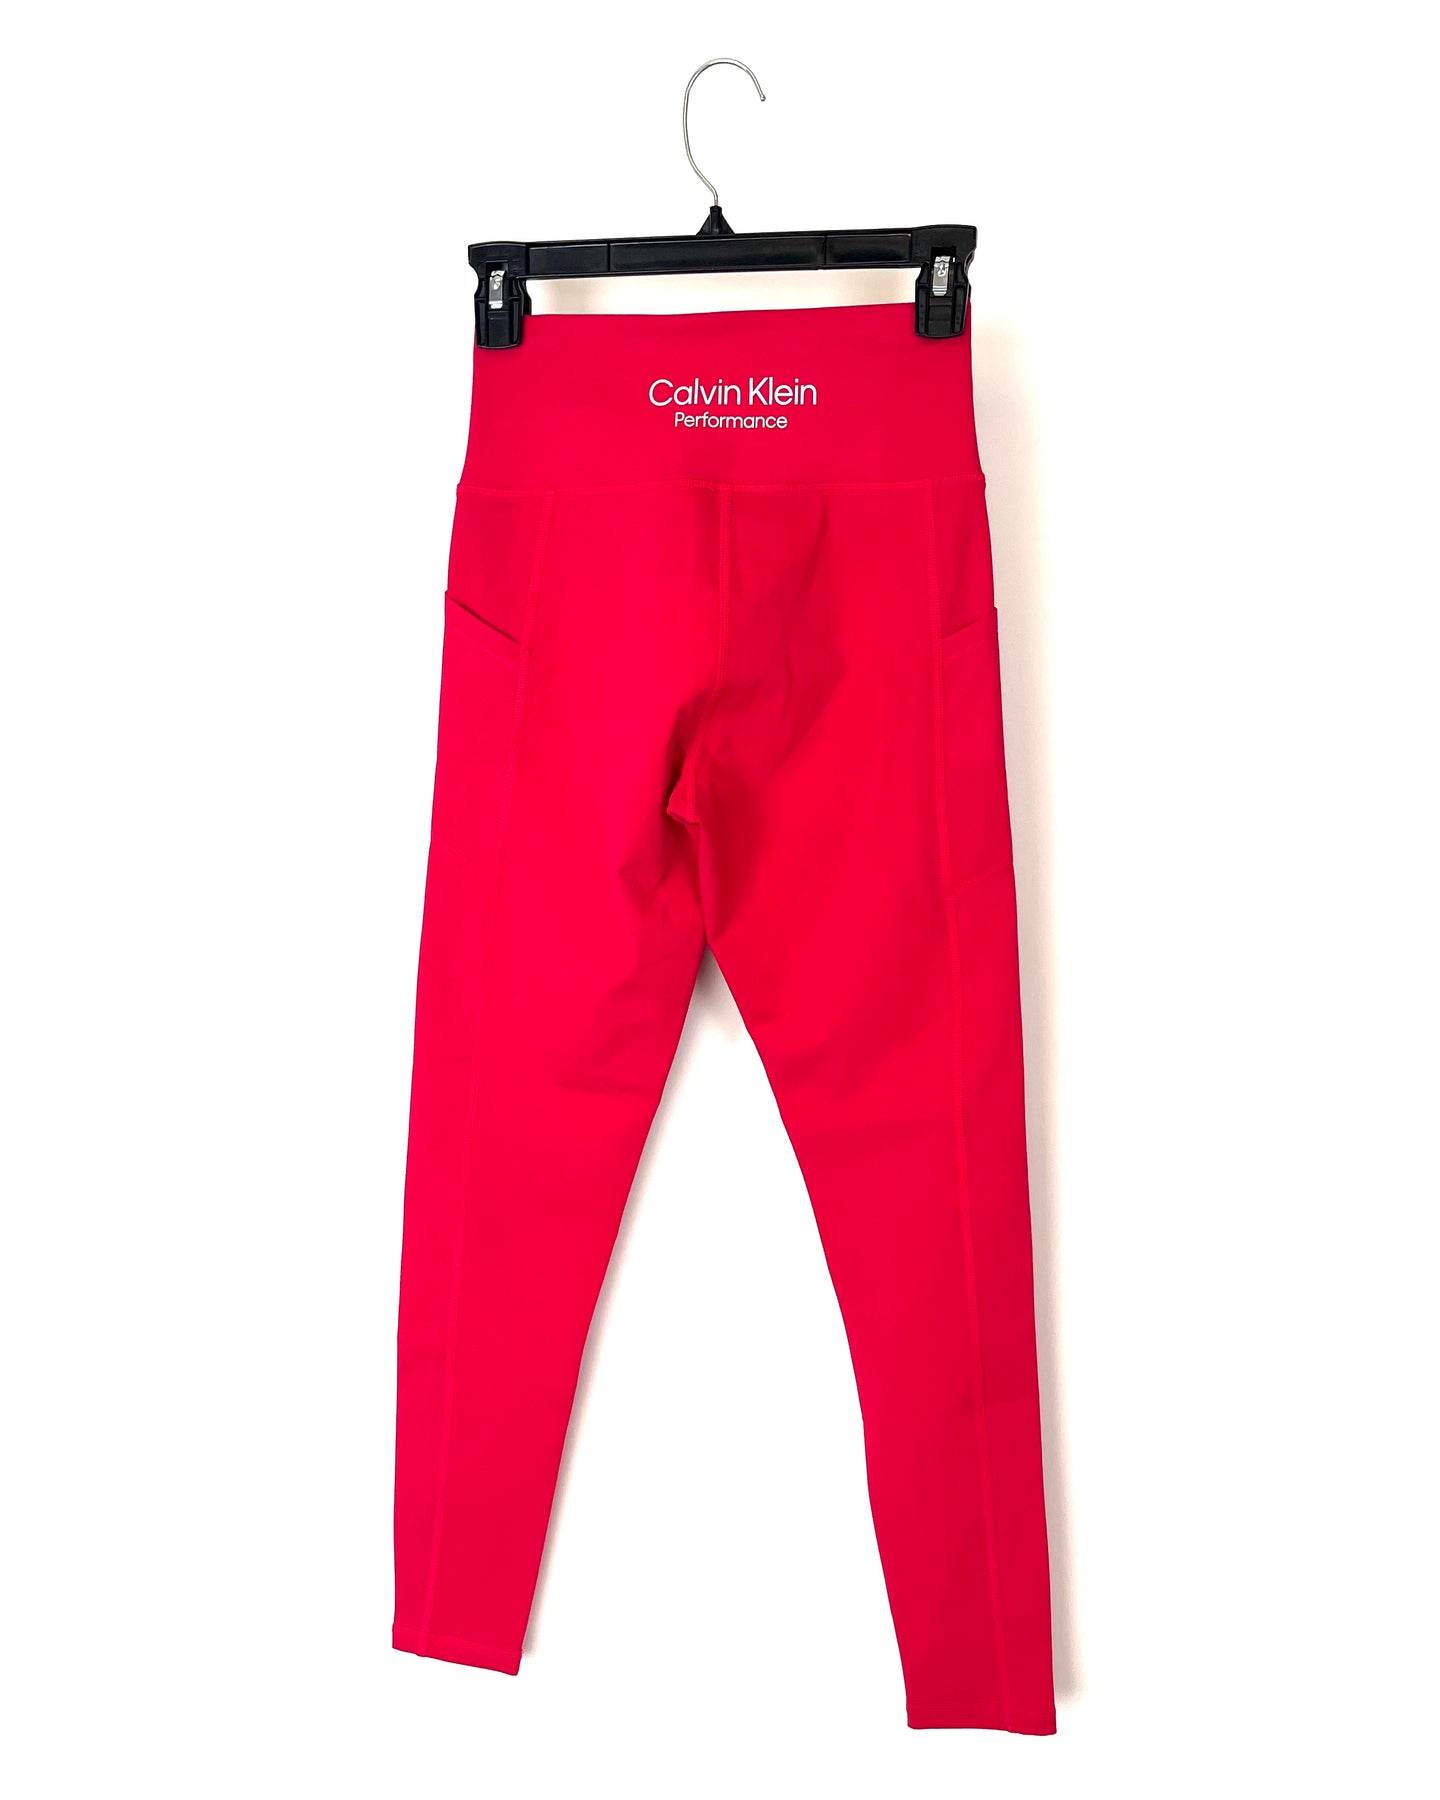 Calvin Klein Hot Pink Activewear Leggings With Pockets - Small – The  Fashion Foundation